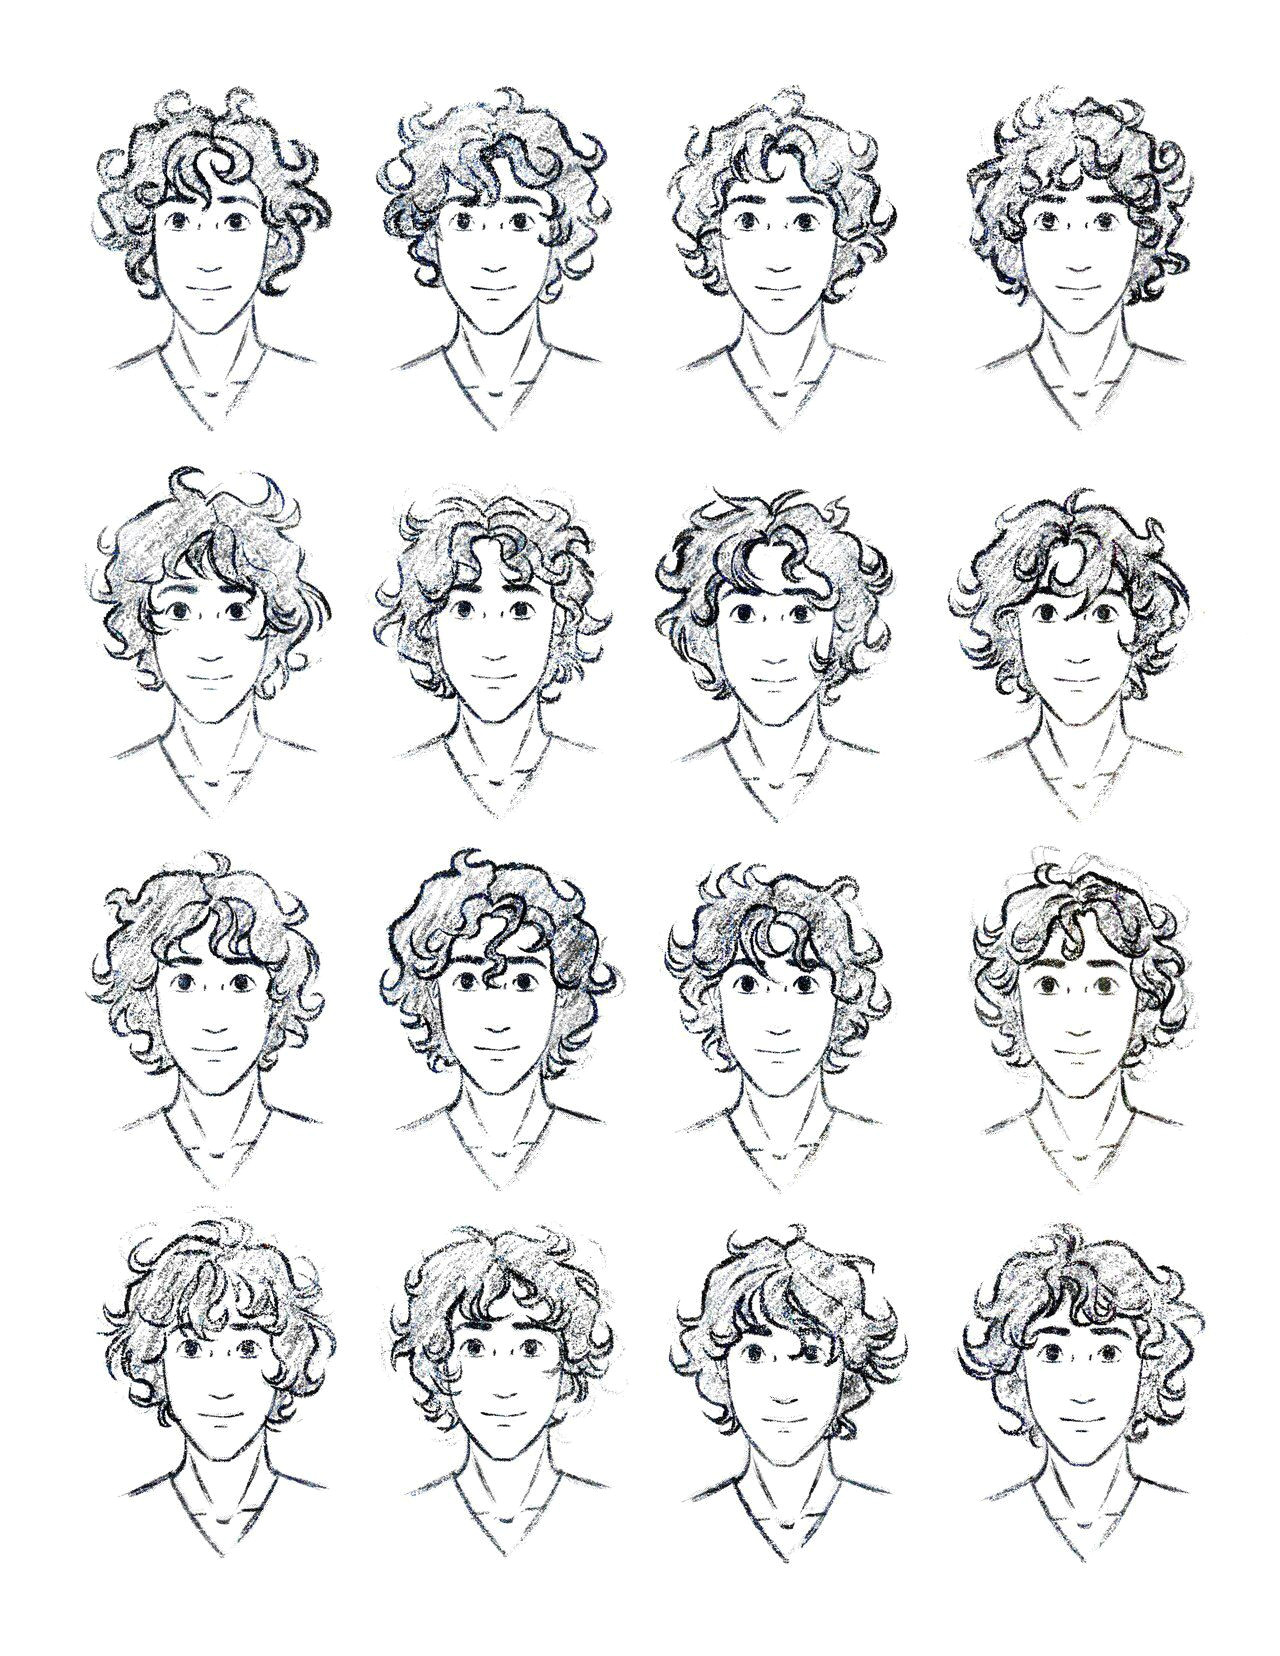 curly hair reference for guys totally need this